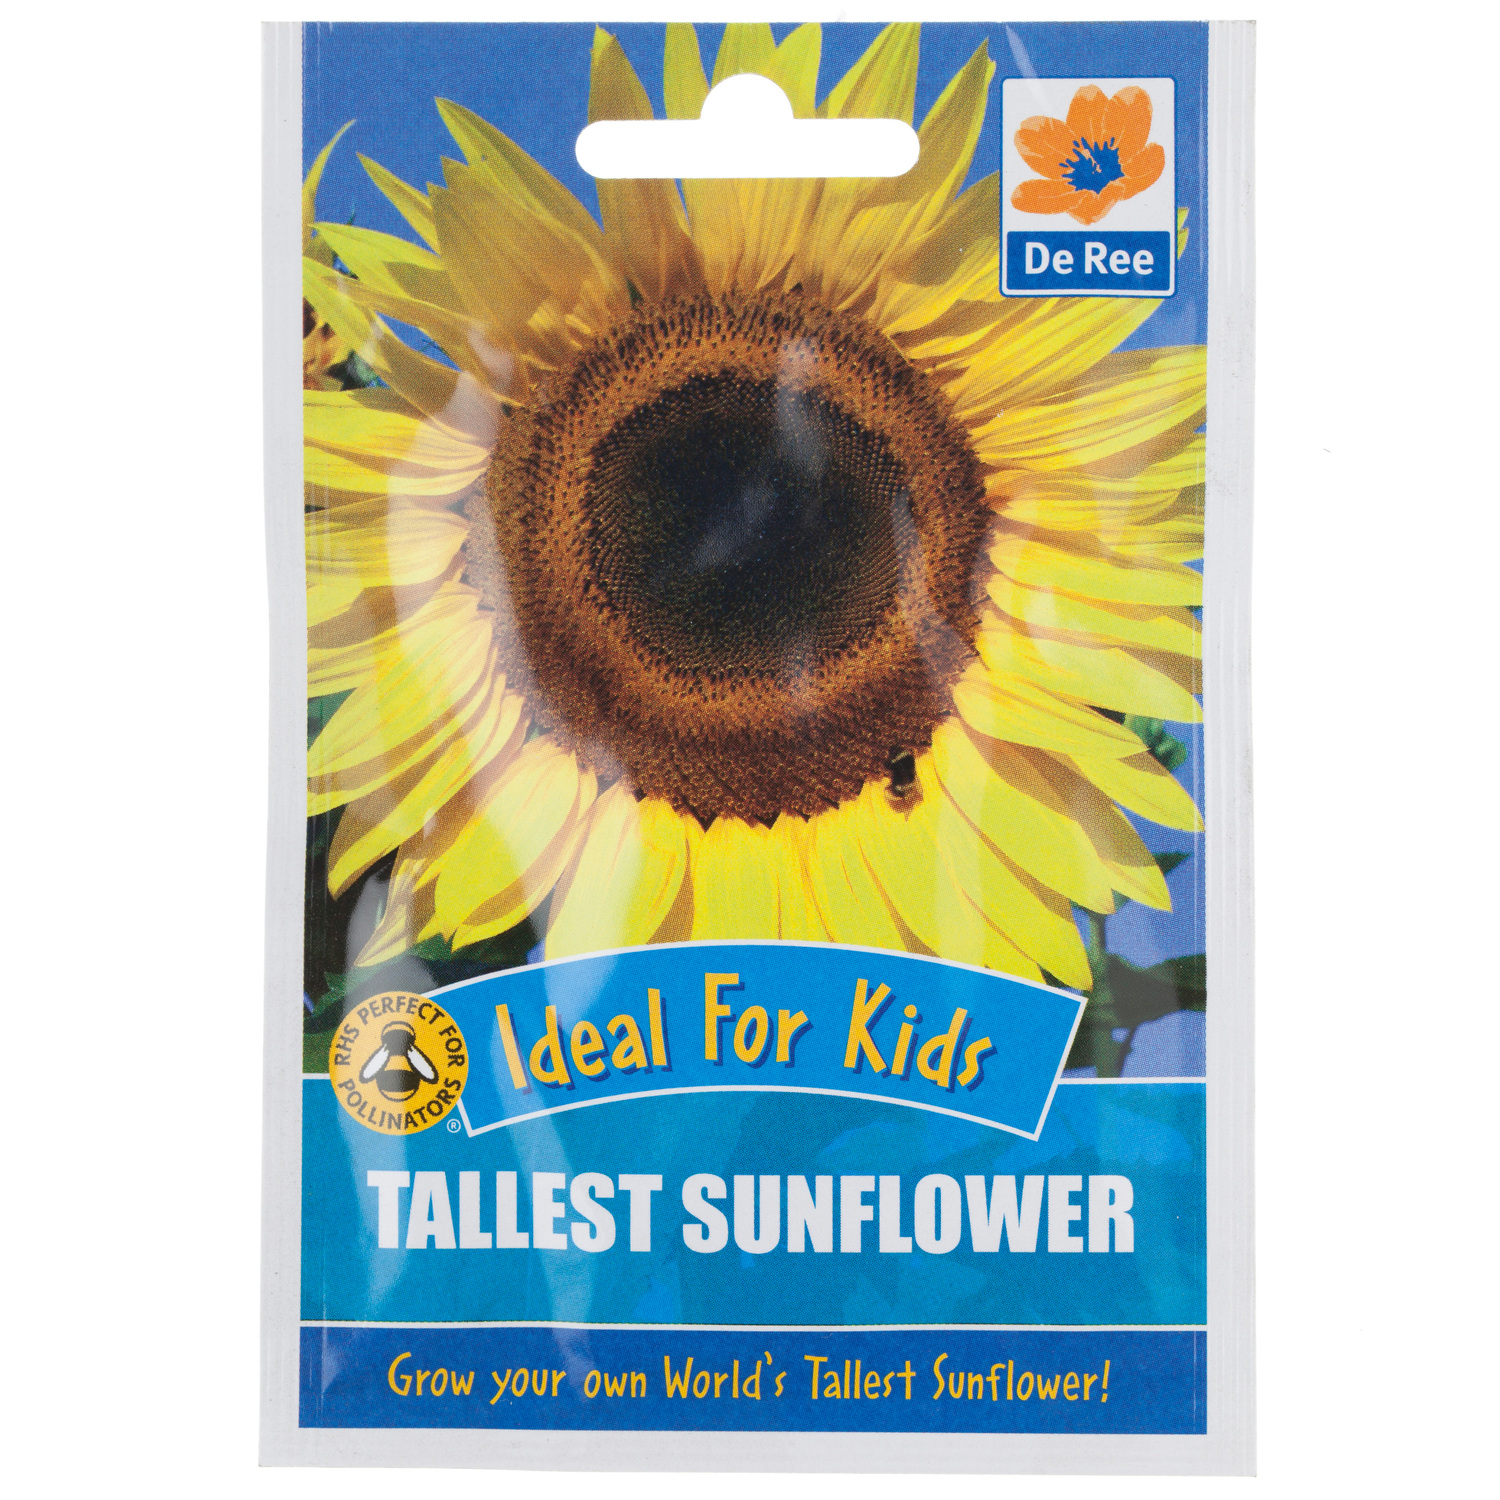 Tallest Sunflower Seed Packet Image